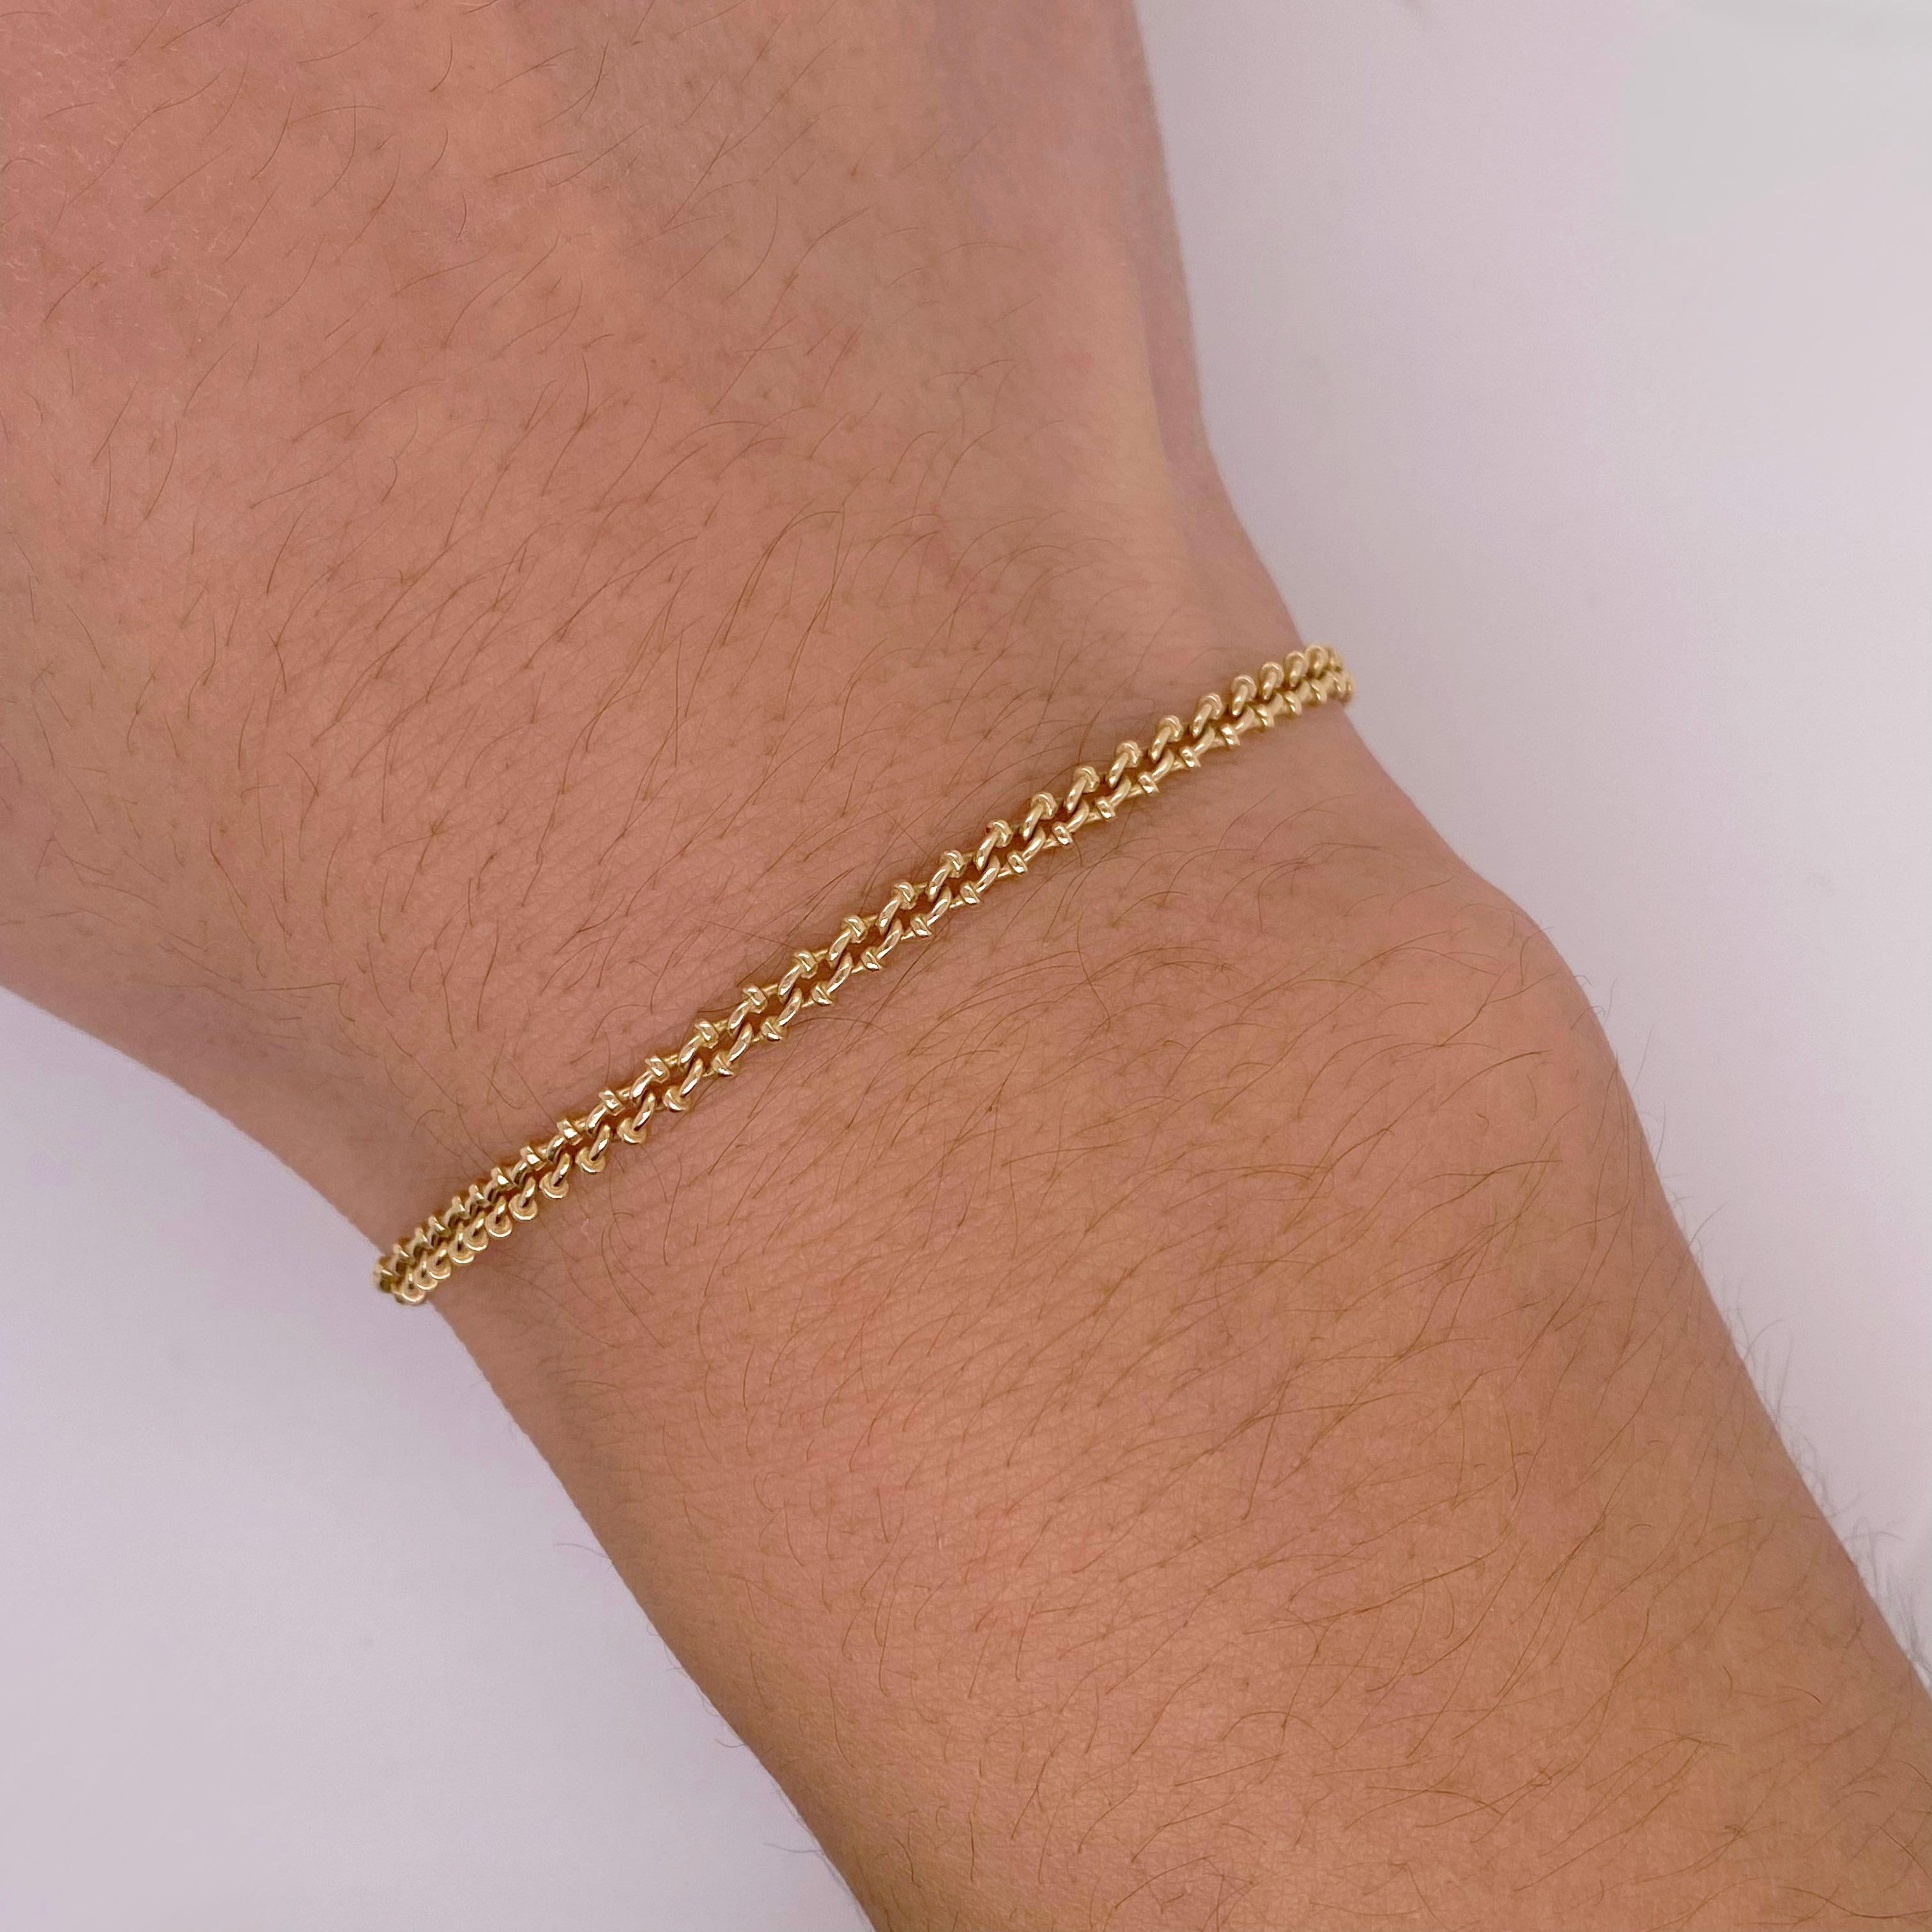 If you're looking for a versatile bracelet you've found it! This bracelet can be worn by itself or with any watch or bracelet! The details for this beautiful bracelet are listed below:
Metal Quality: 14K Yellow Gold
Chain Type: Zipper Link
Length: 7